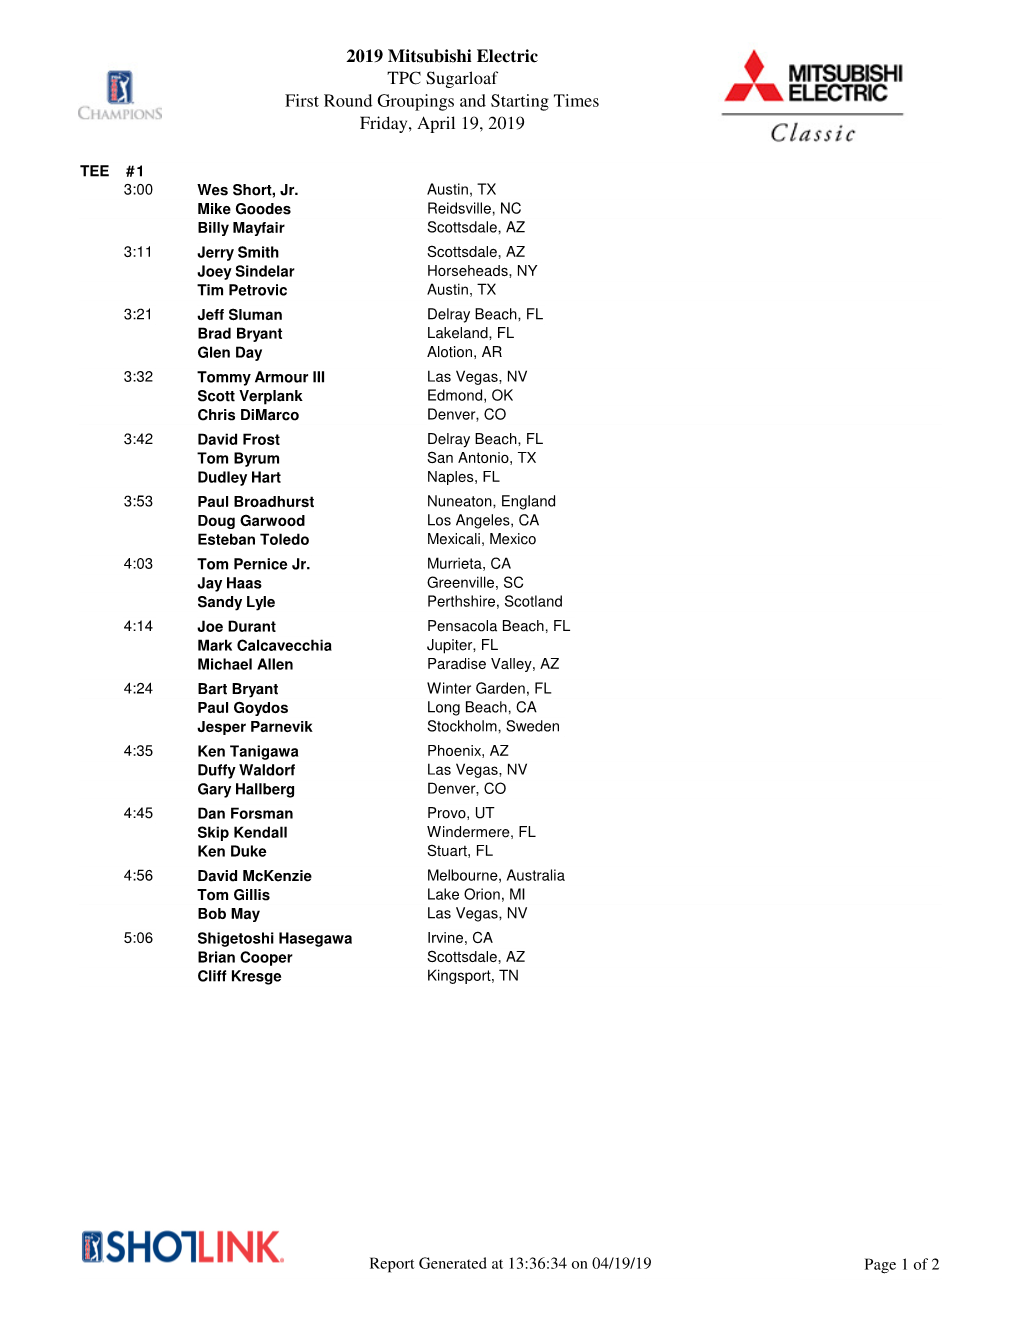 Revised First Round Groupings And